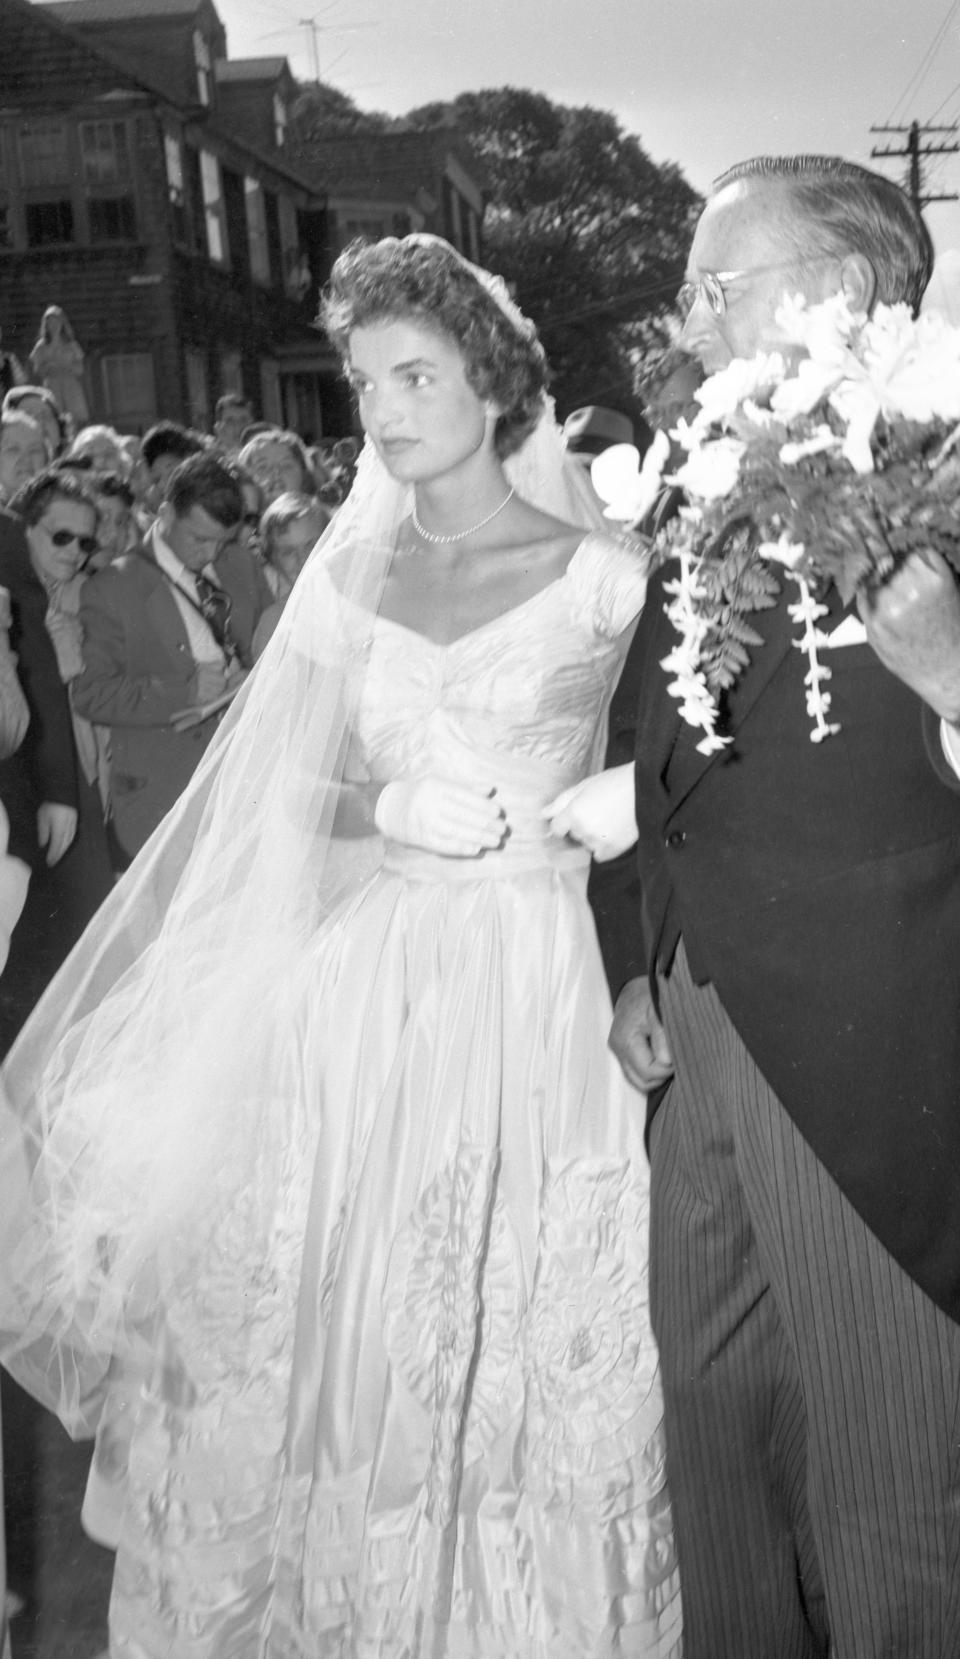 Scenes from the wedding of Massachusetts Sen. John F. Kennedy and Jacqueline Bouvier, who were married on Sept. 12, 1953 at St. Mary's Church in Newport, Rhode Island.